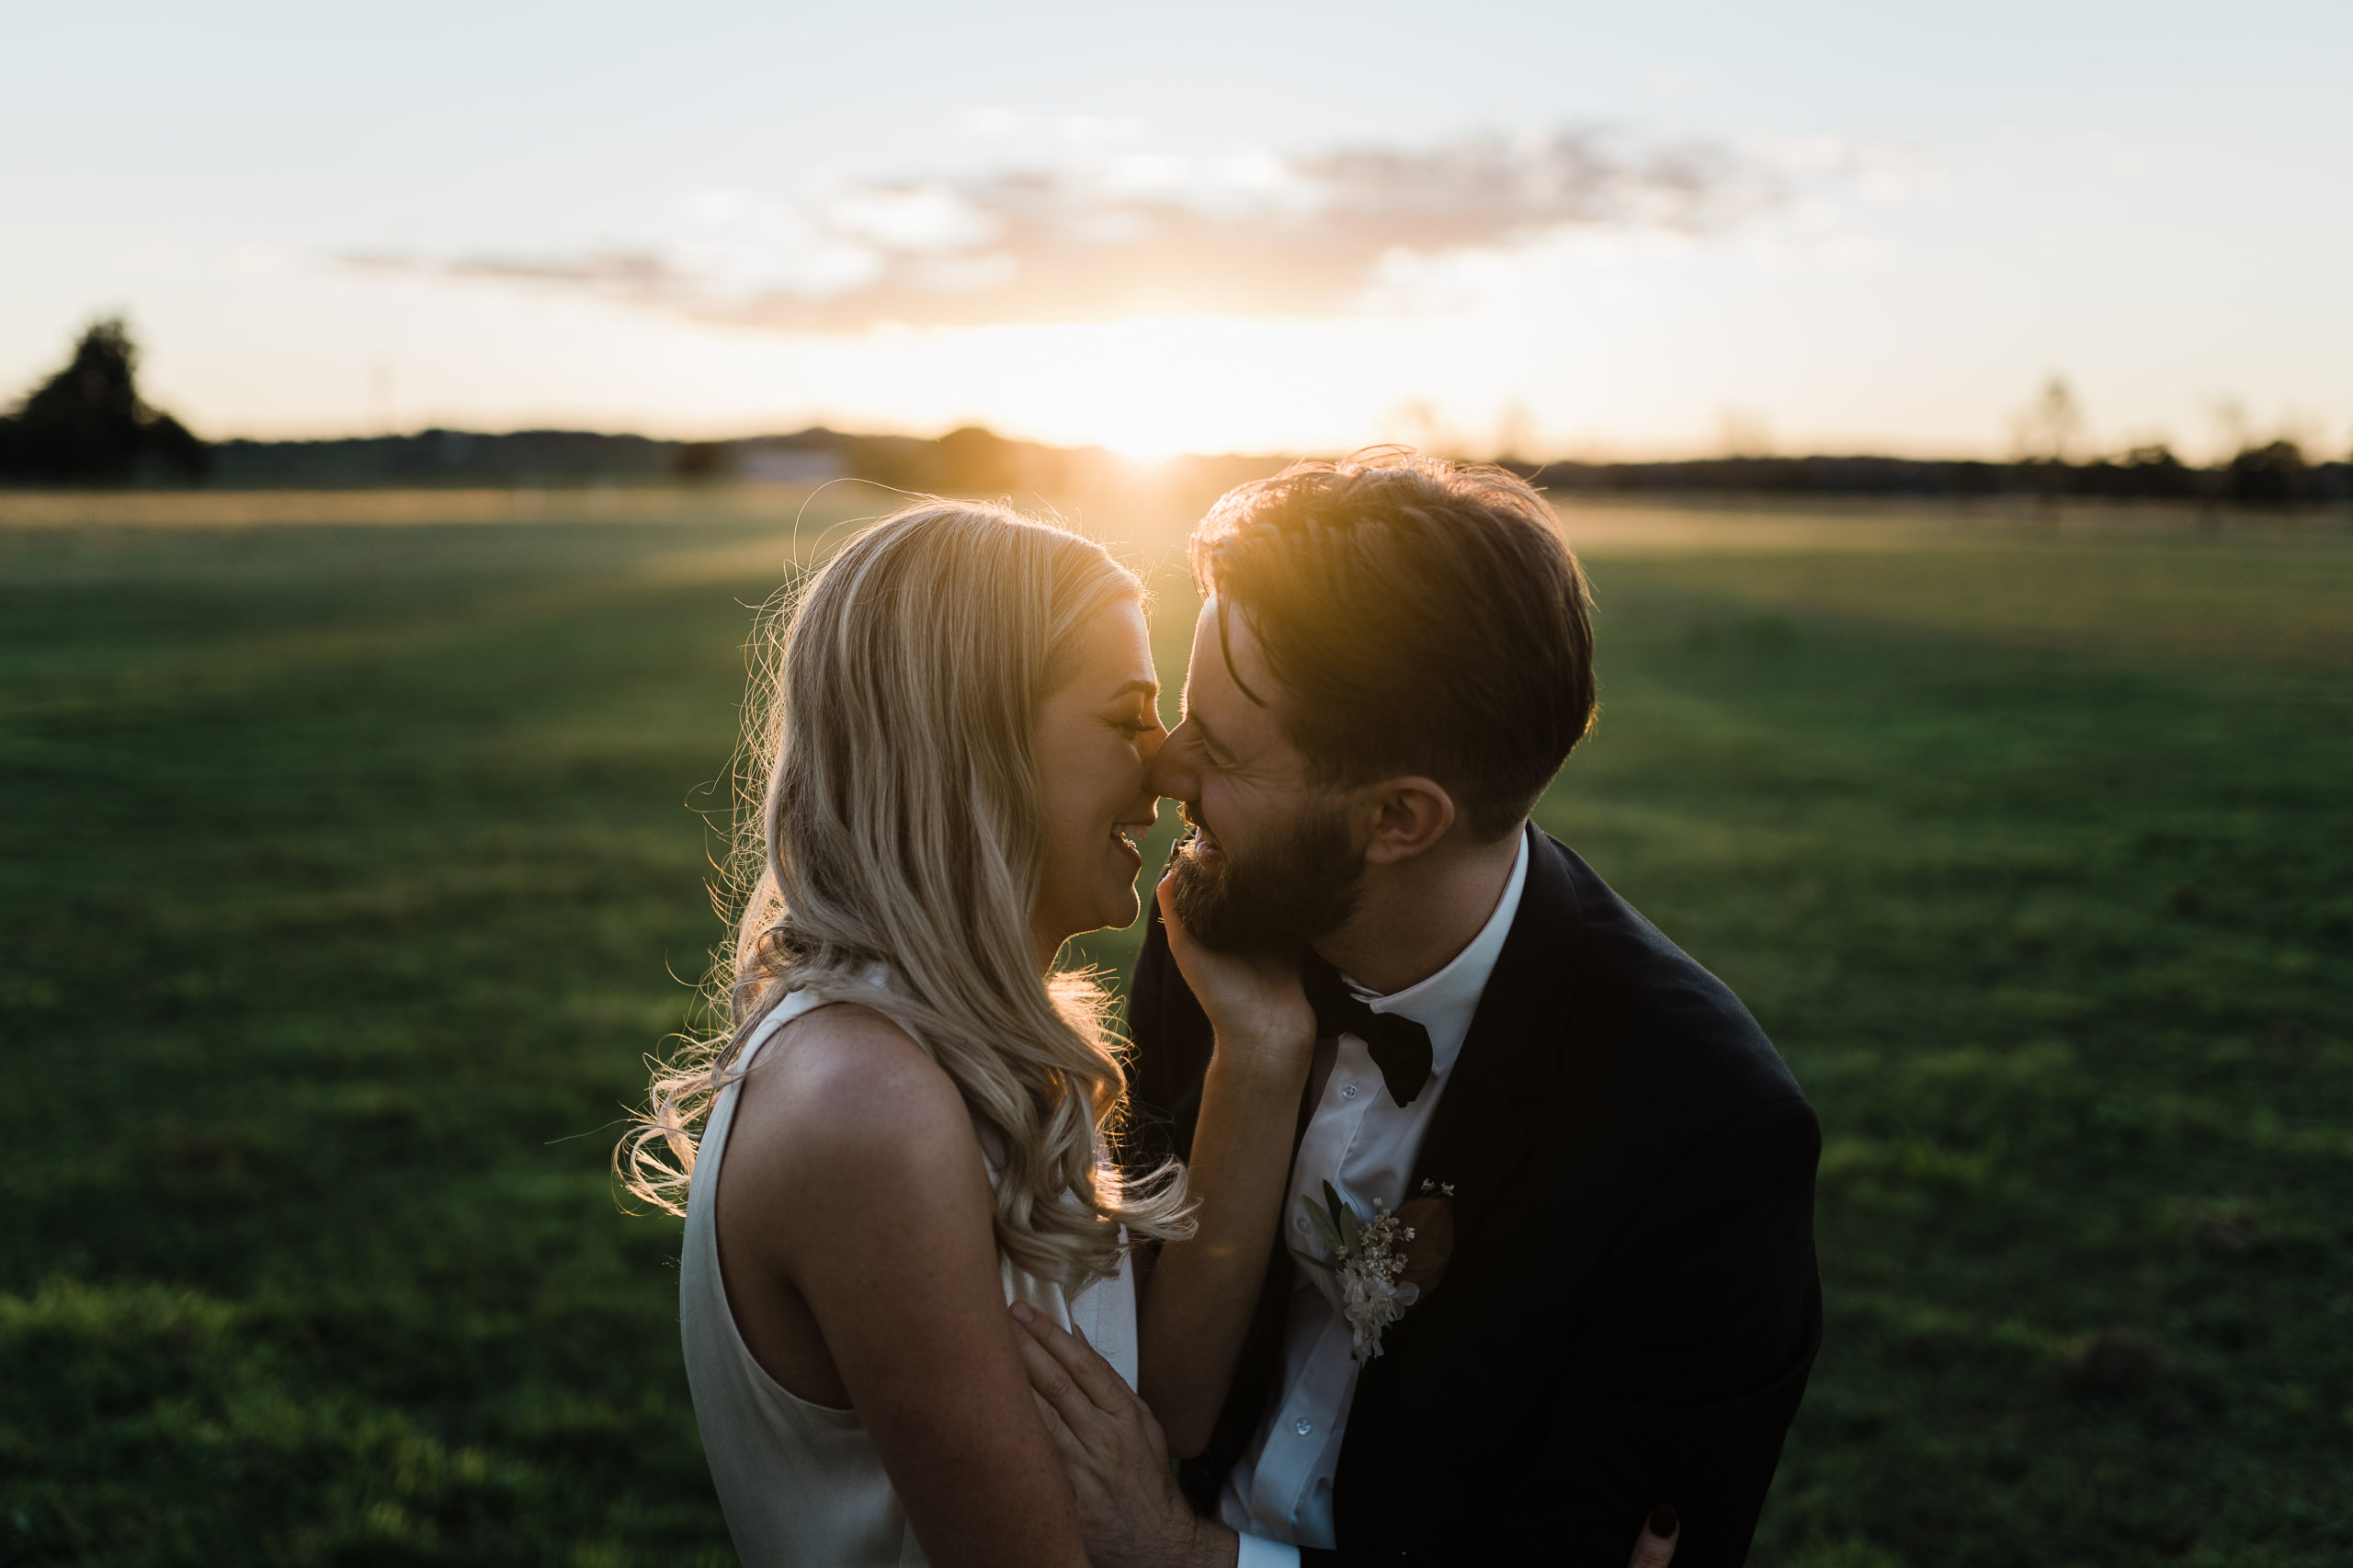 an intimate wedding film captures all the little moments at sunset at Dagwood estate